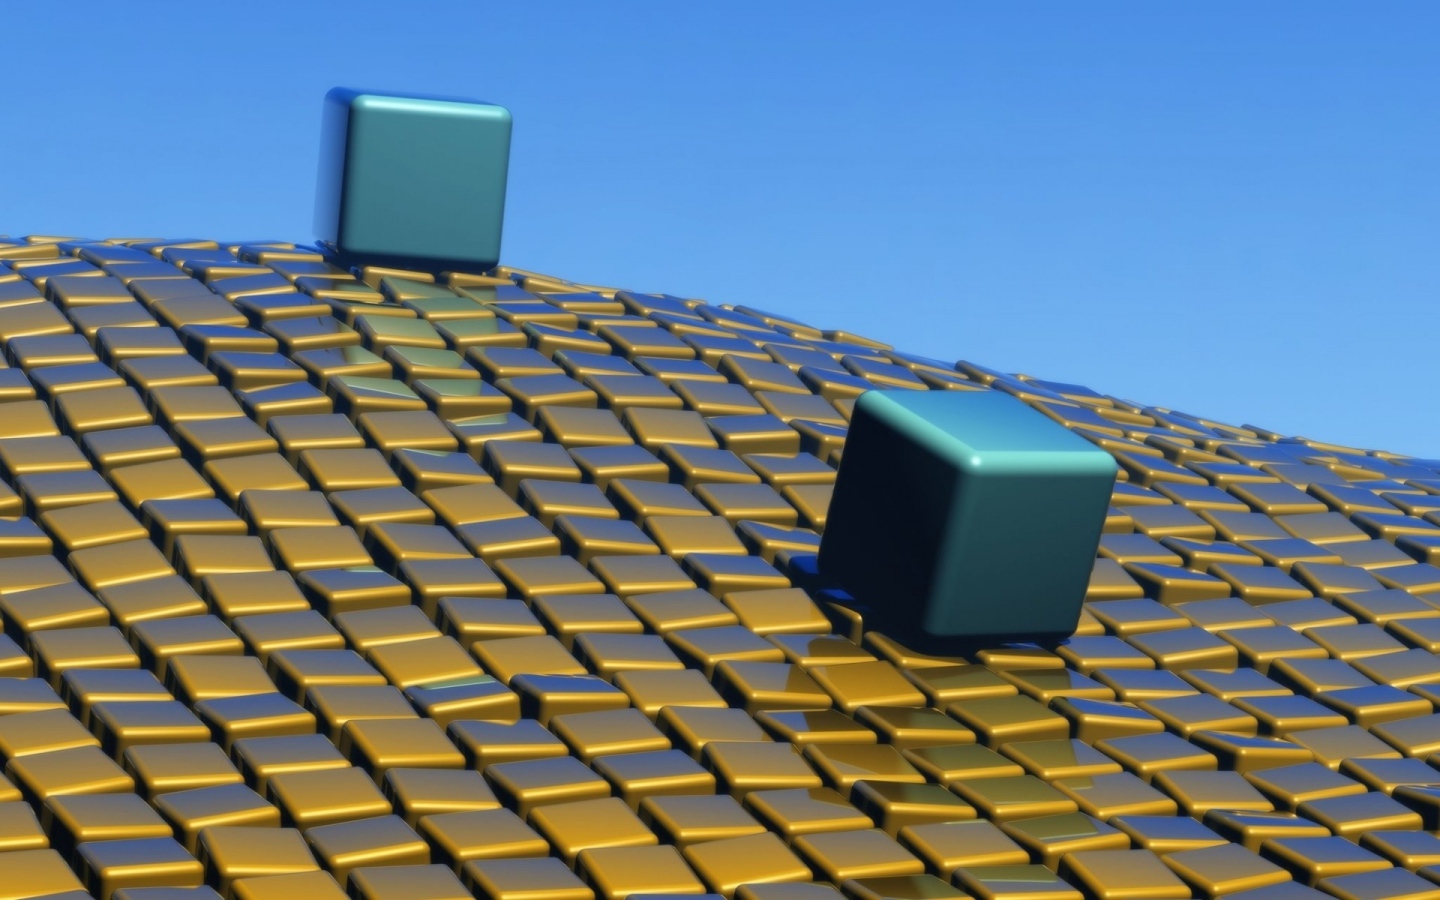 Two 3d cubes on an uneven geometric surface